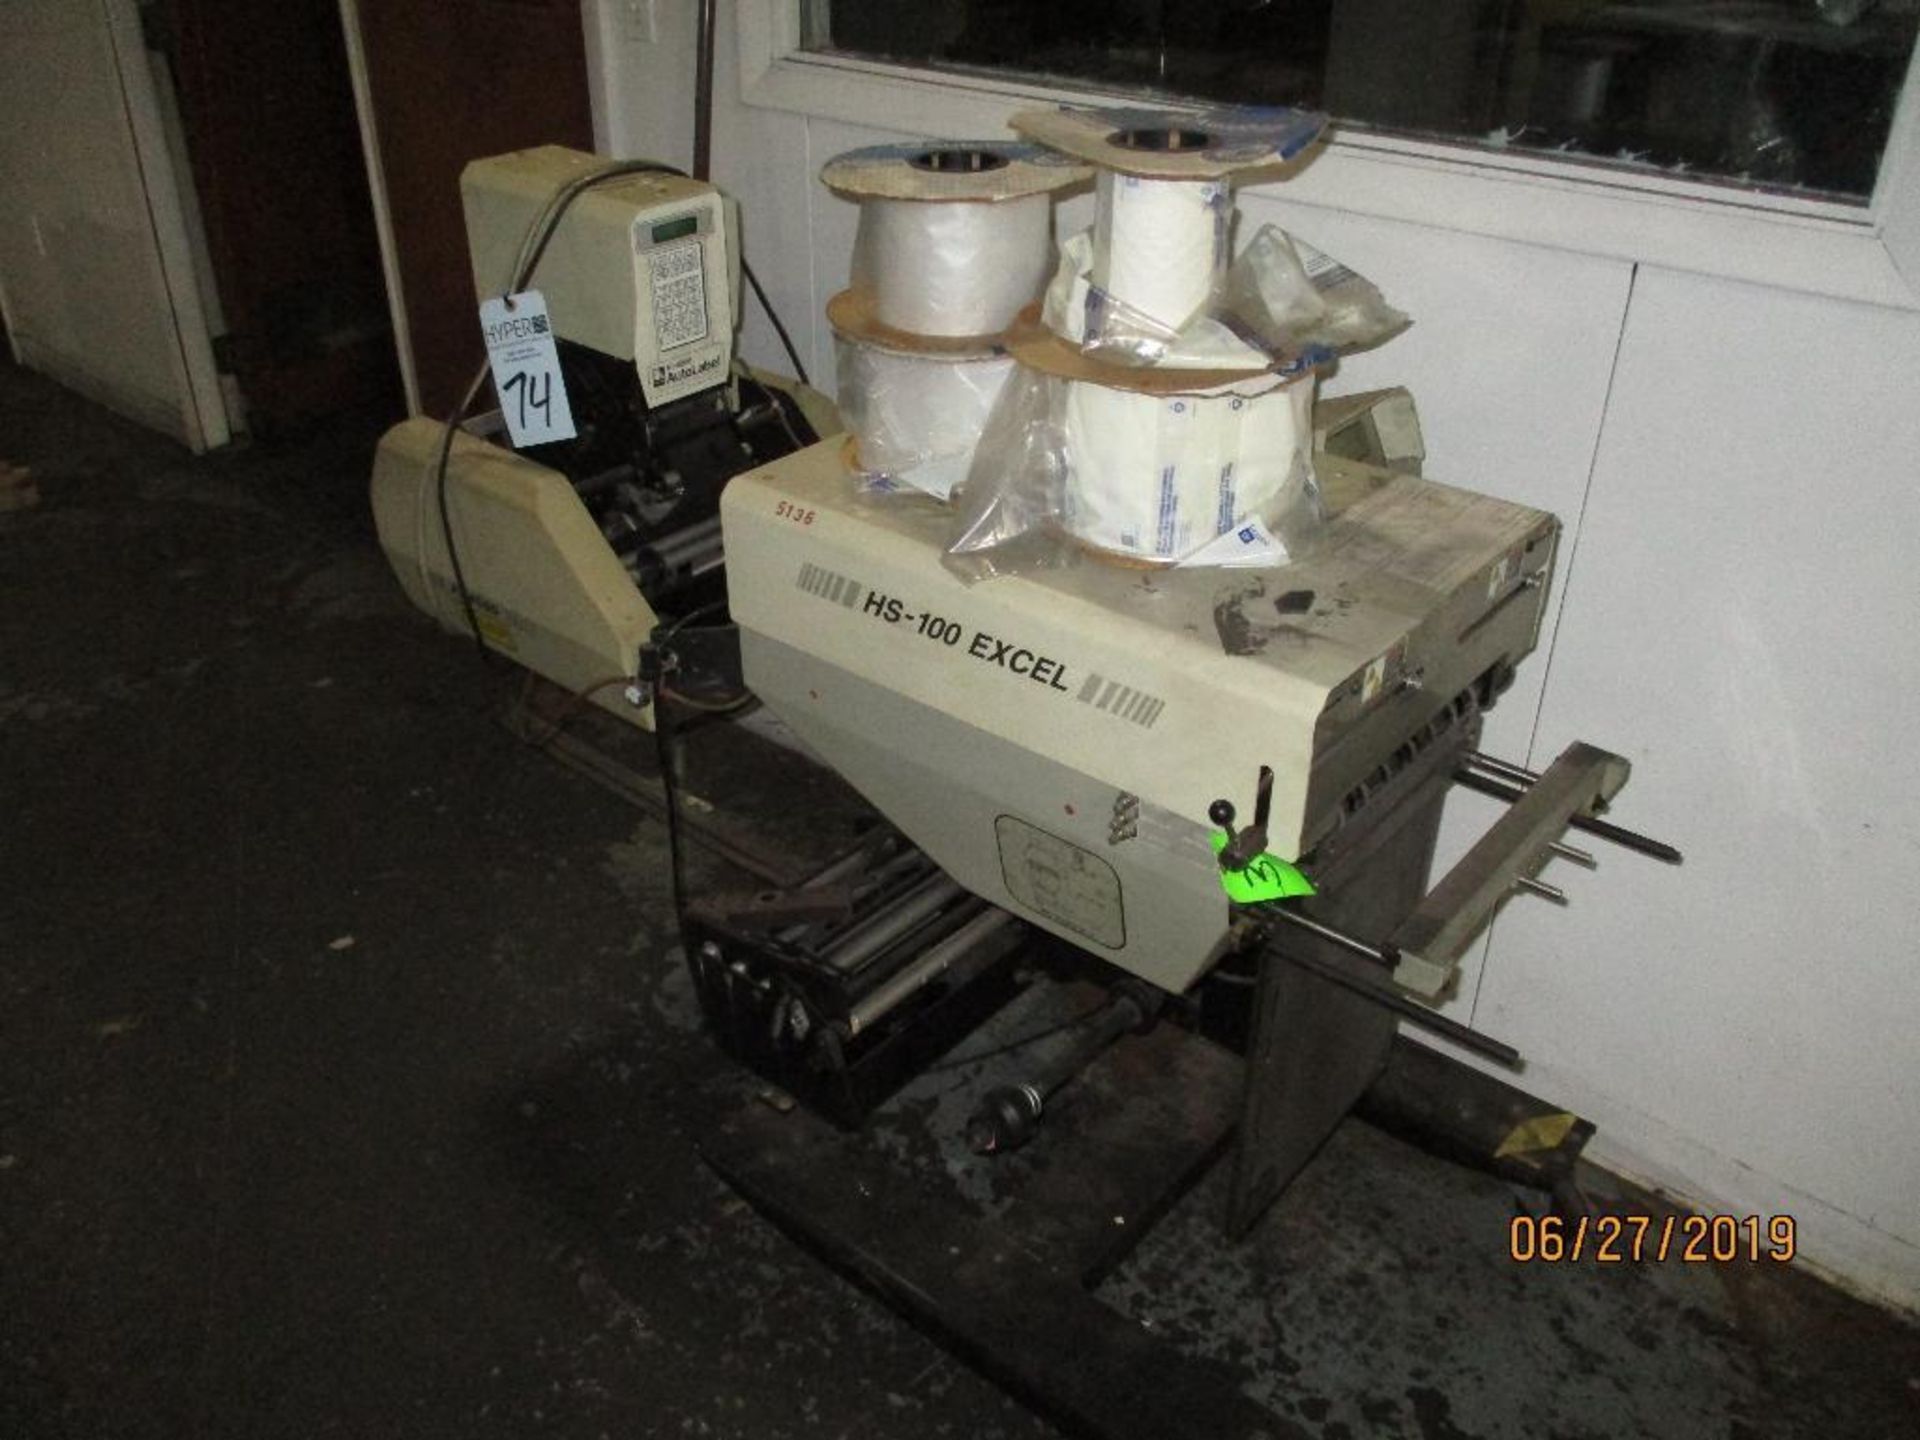 HS-100 Excel Auto Bag Machine S/N 98-12X6-3334 With PI-4000 Auto Label Attached, Located at 800 West - Image 2 of 4